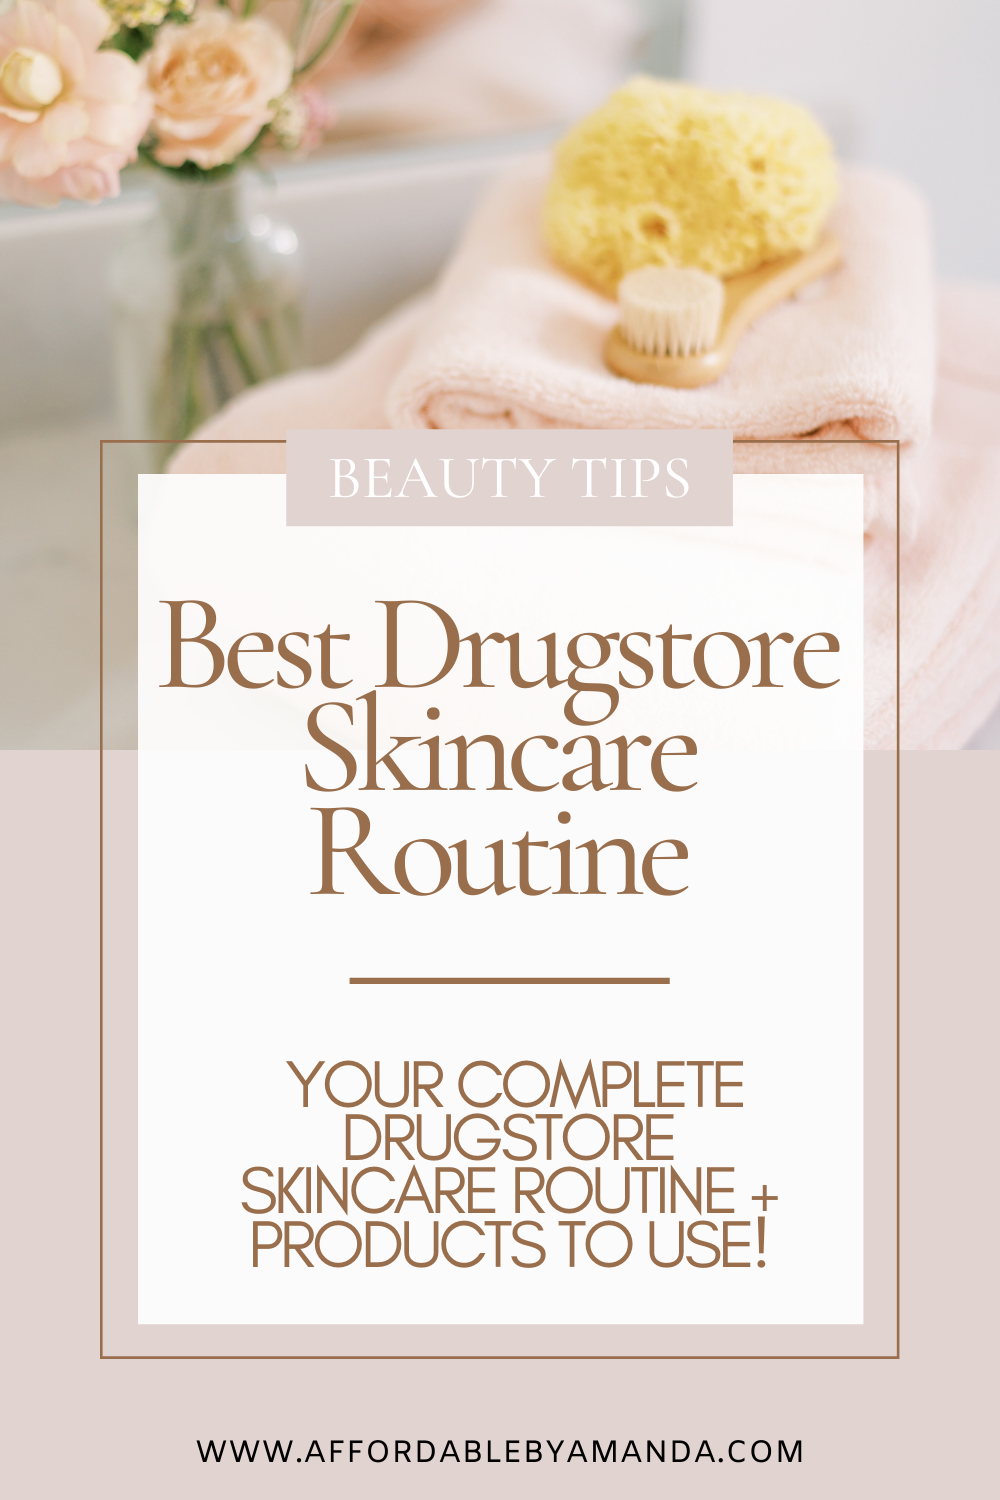 Best Drugstore Skincare Routine 2020. Affordable Skin Care Routine. Best Drugstore Skincare for Oily Skin. Best Drugstore Skincare Products.